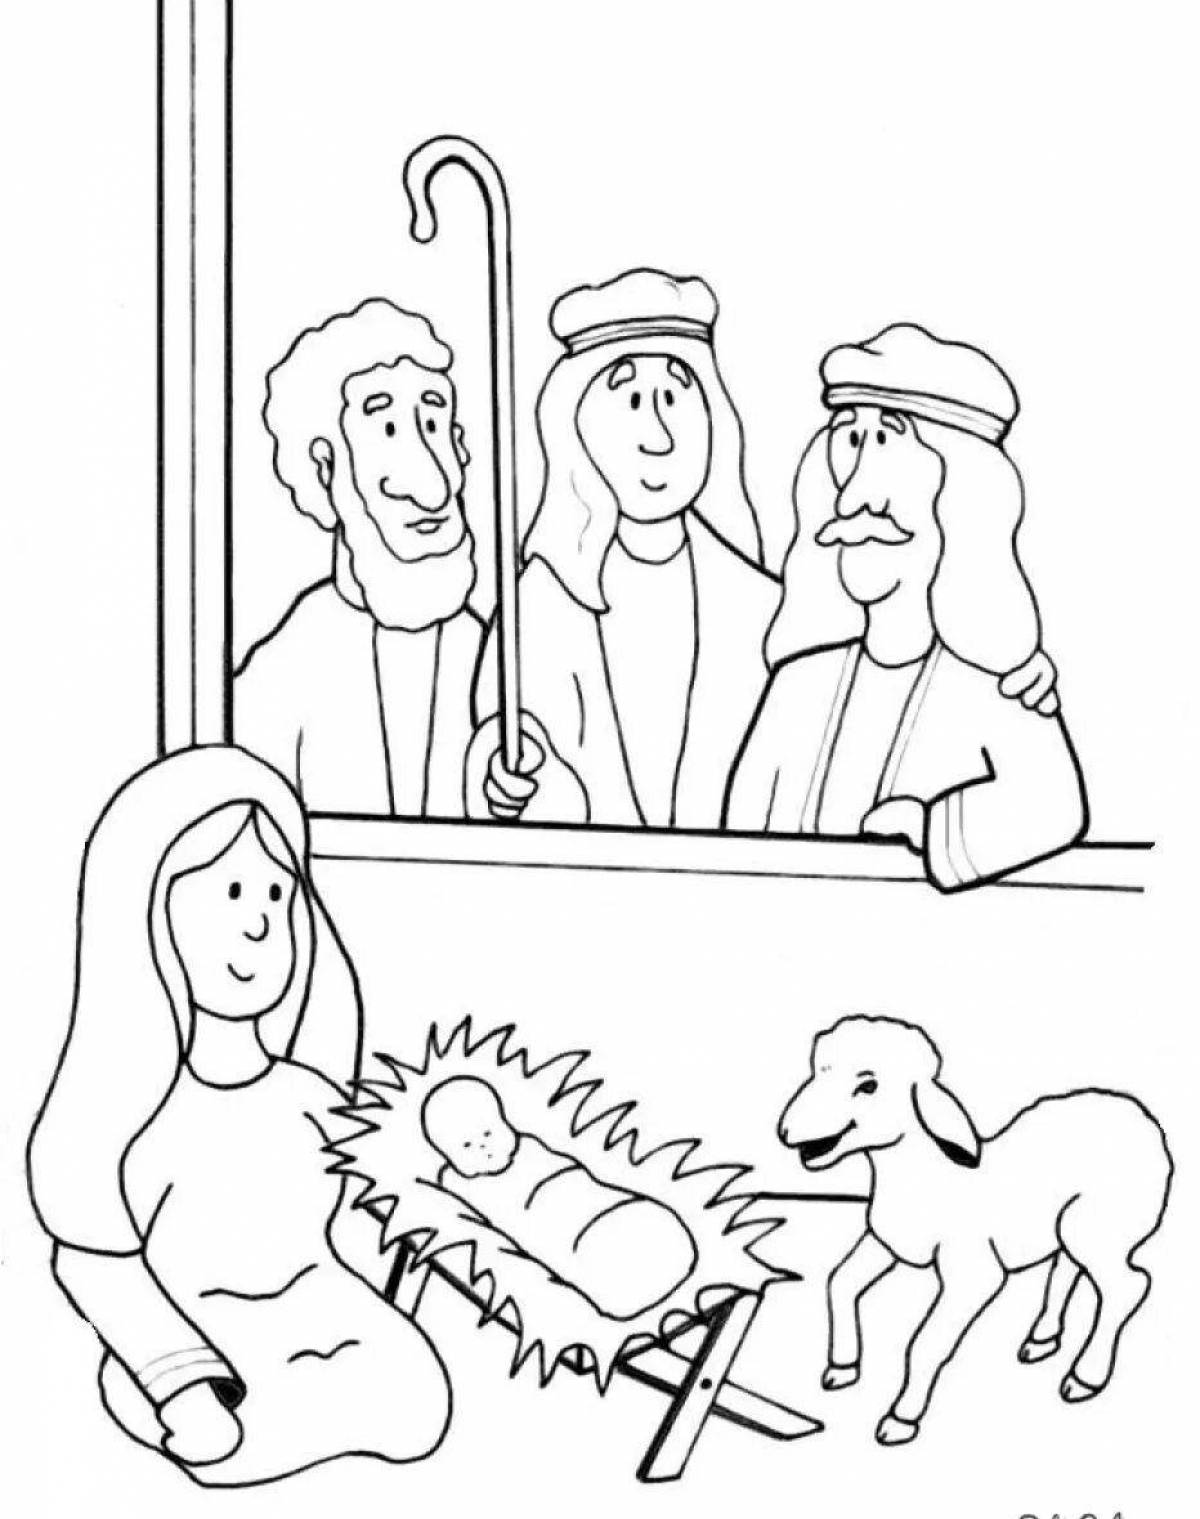 Coloring page exquisite birth of jesus christ